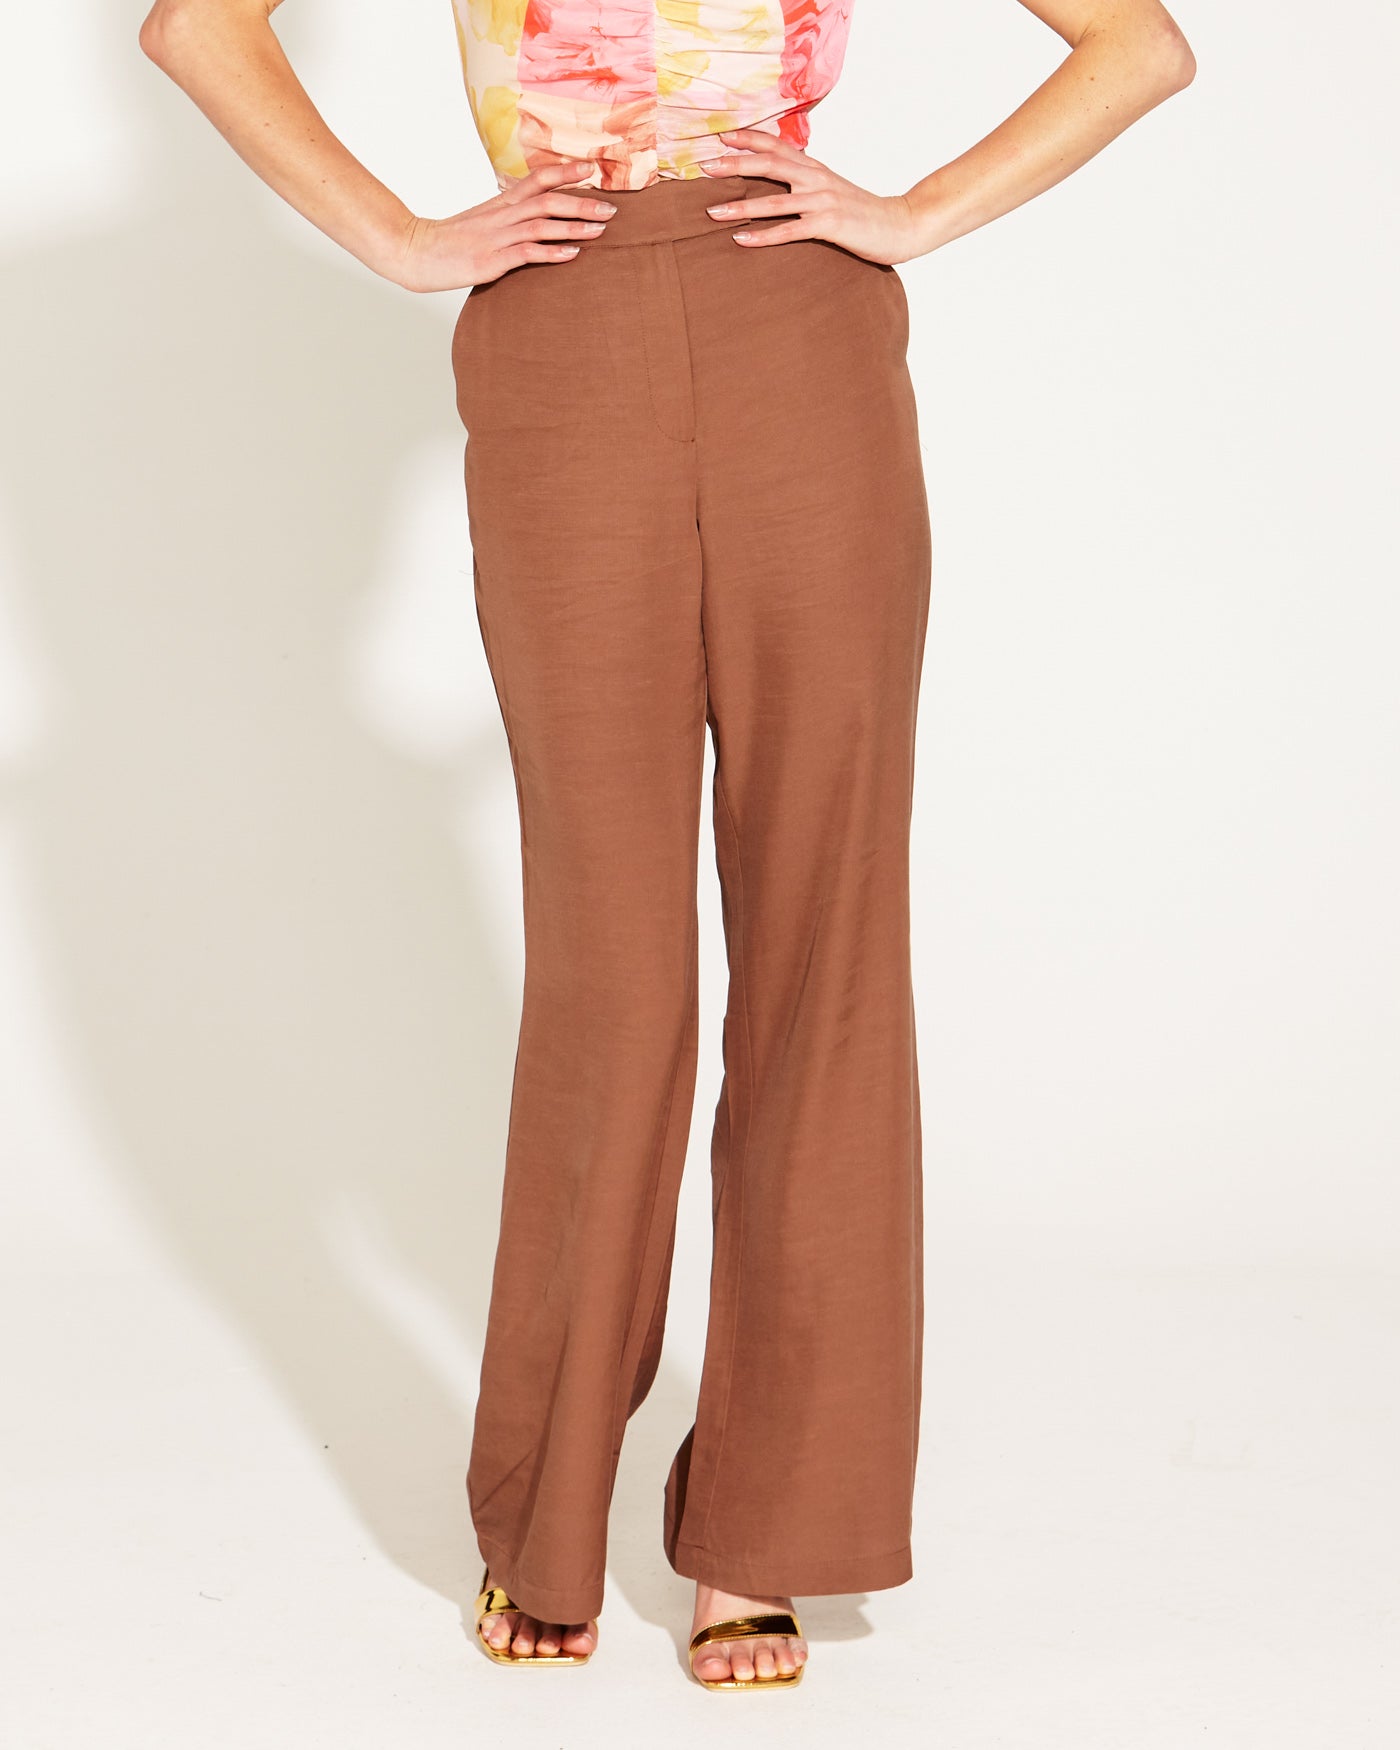 Fate+Becker One And Only High Waisted Flared Pant - Mocha